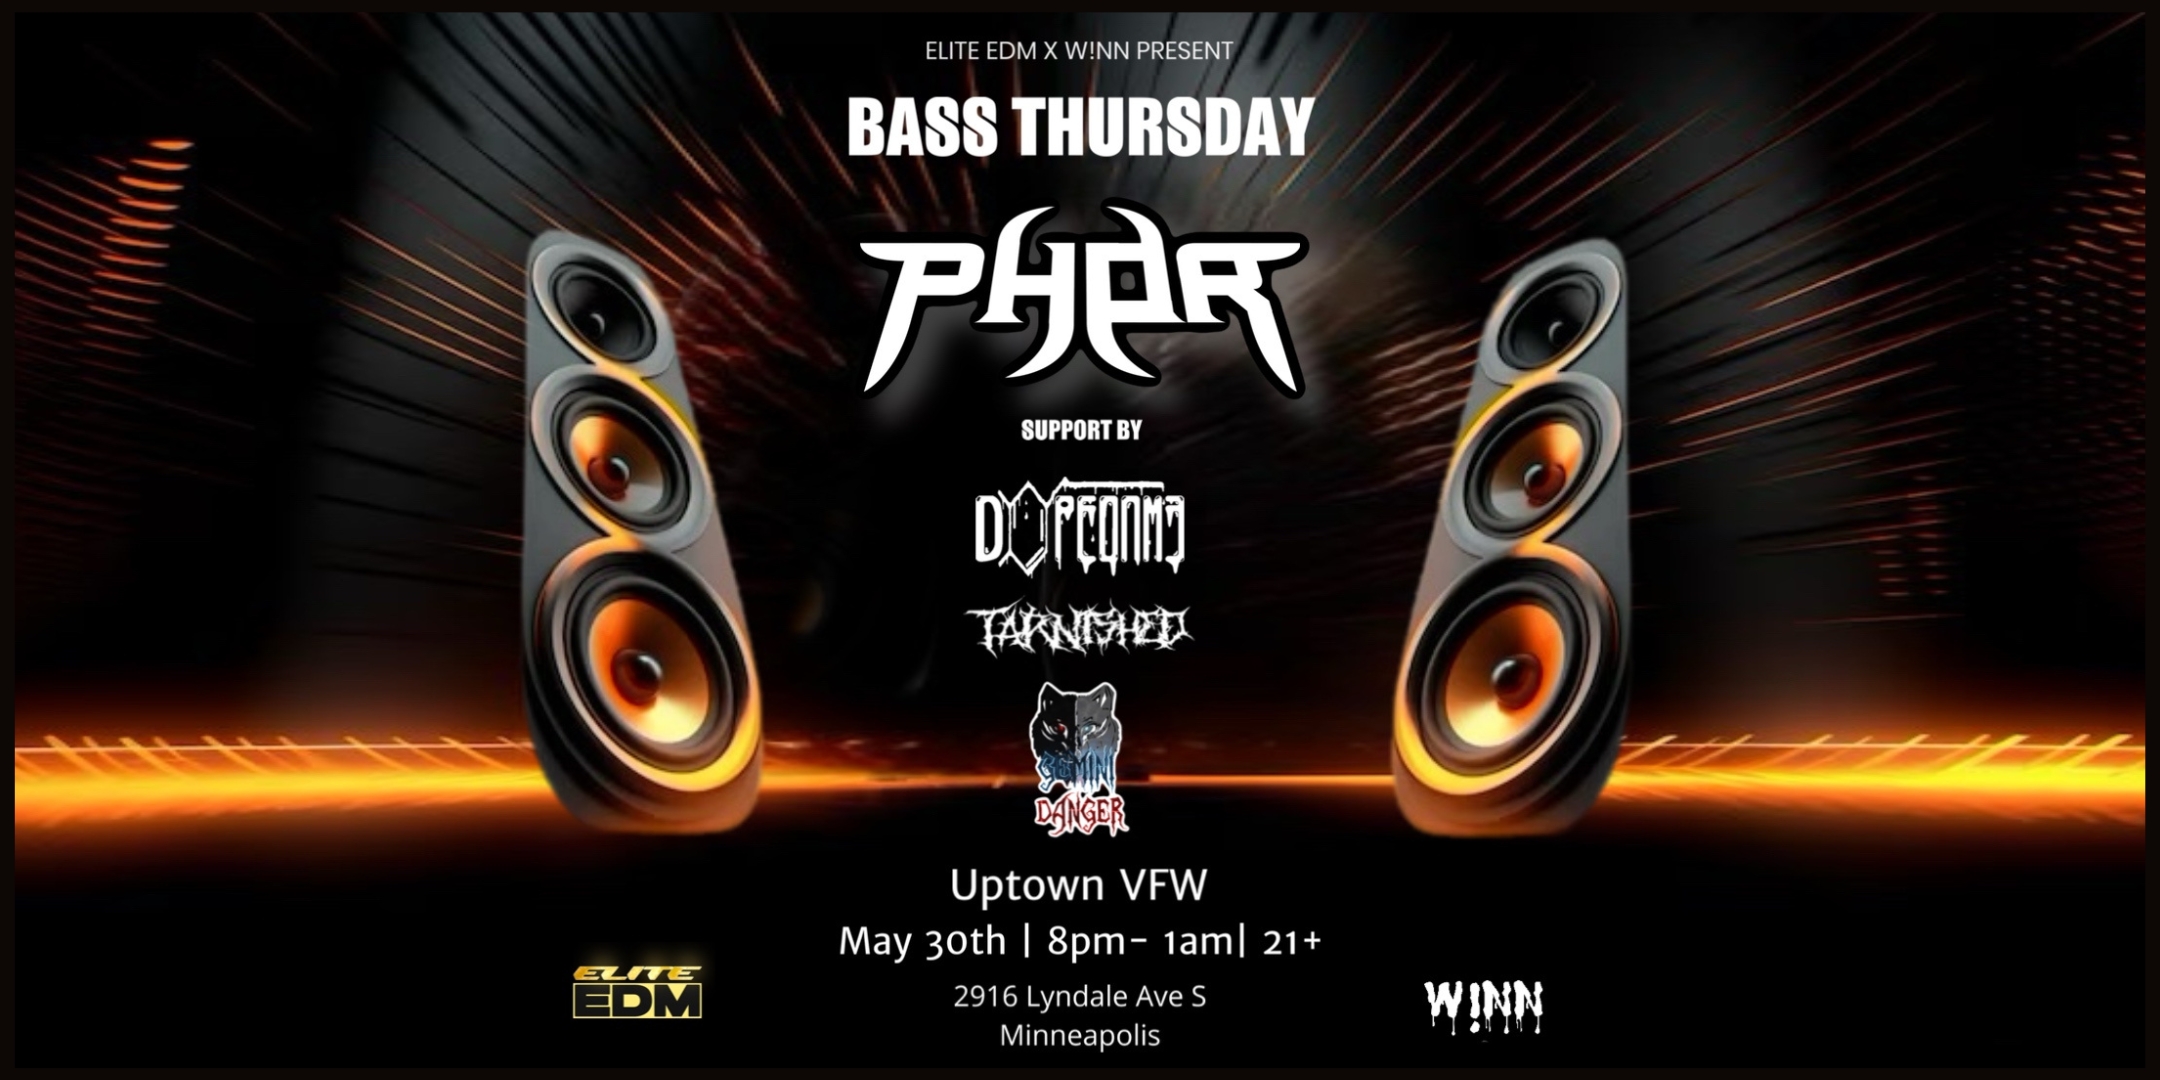 ELITE EDM x W!NN Presents: PHOR (Minneapolis debut) Support by: Dopeonme, Tarnished, & Gemini Danger Thursday May 23 James Ballentine “Uptown” VFW Post 246 Doors 8:00pm :: Music 8pm-1am :: 21+ GA $10 ADV / $15 DOS Tickets On Sale Now